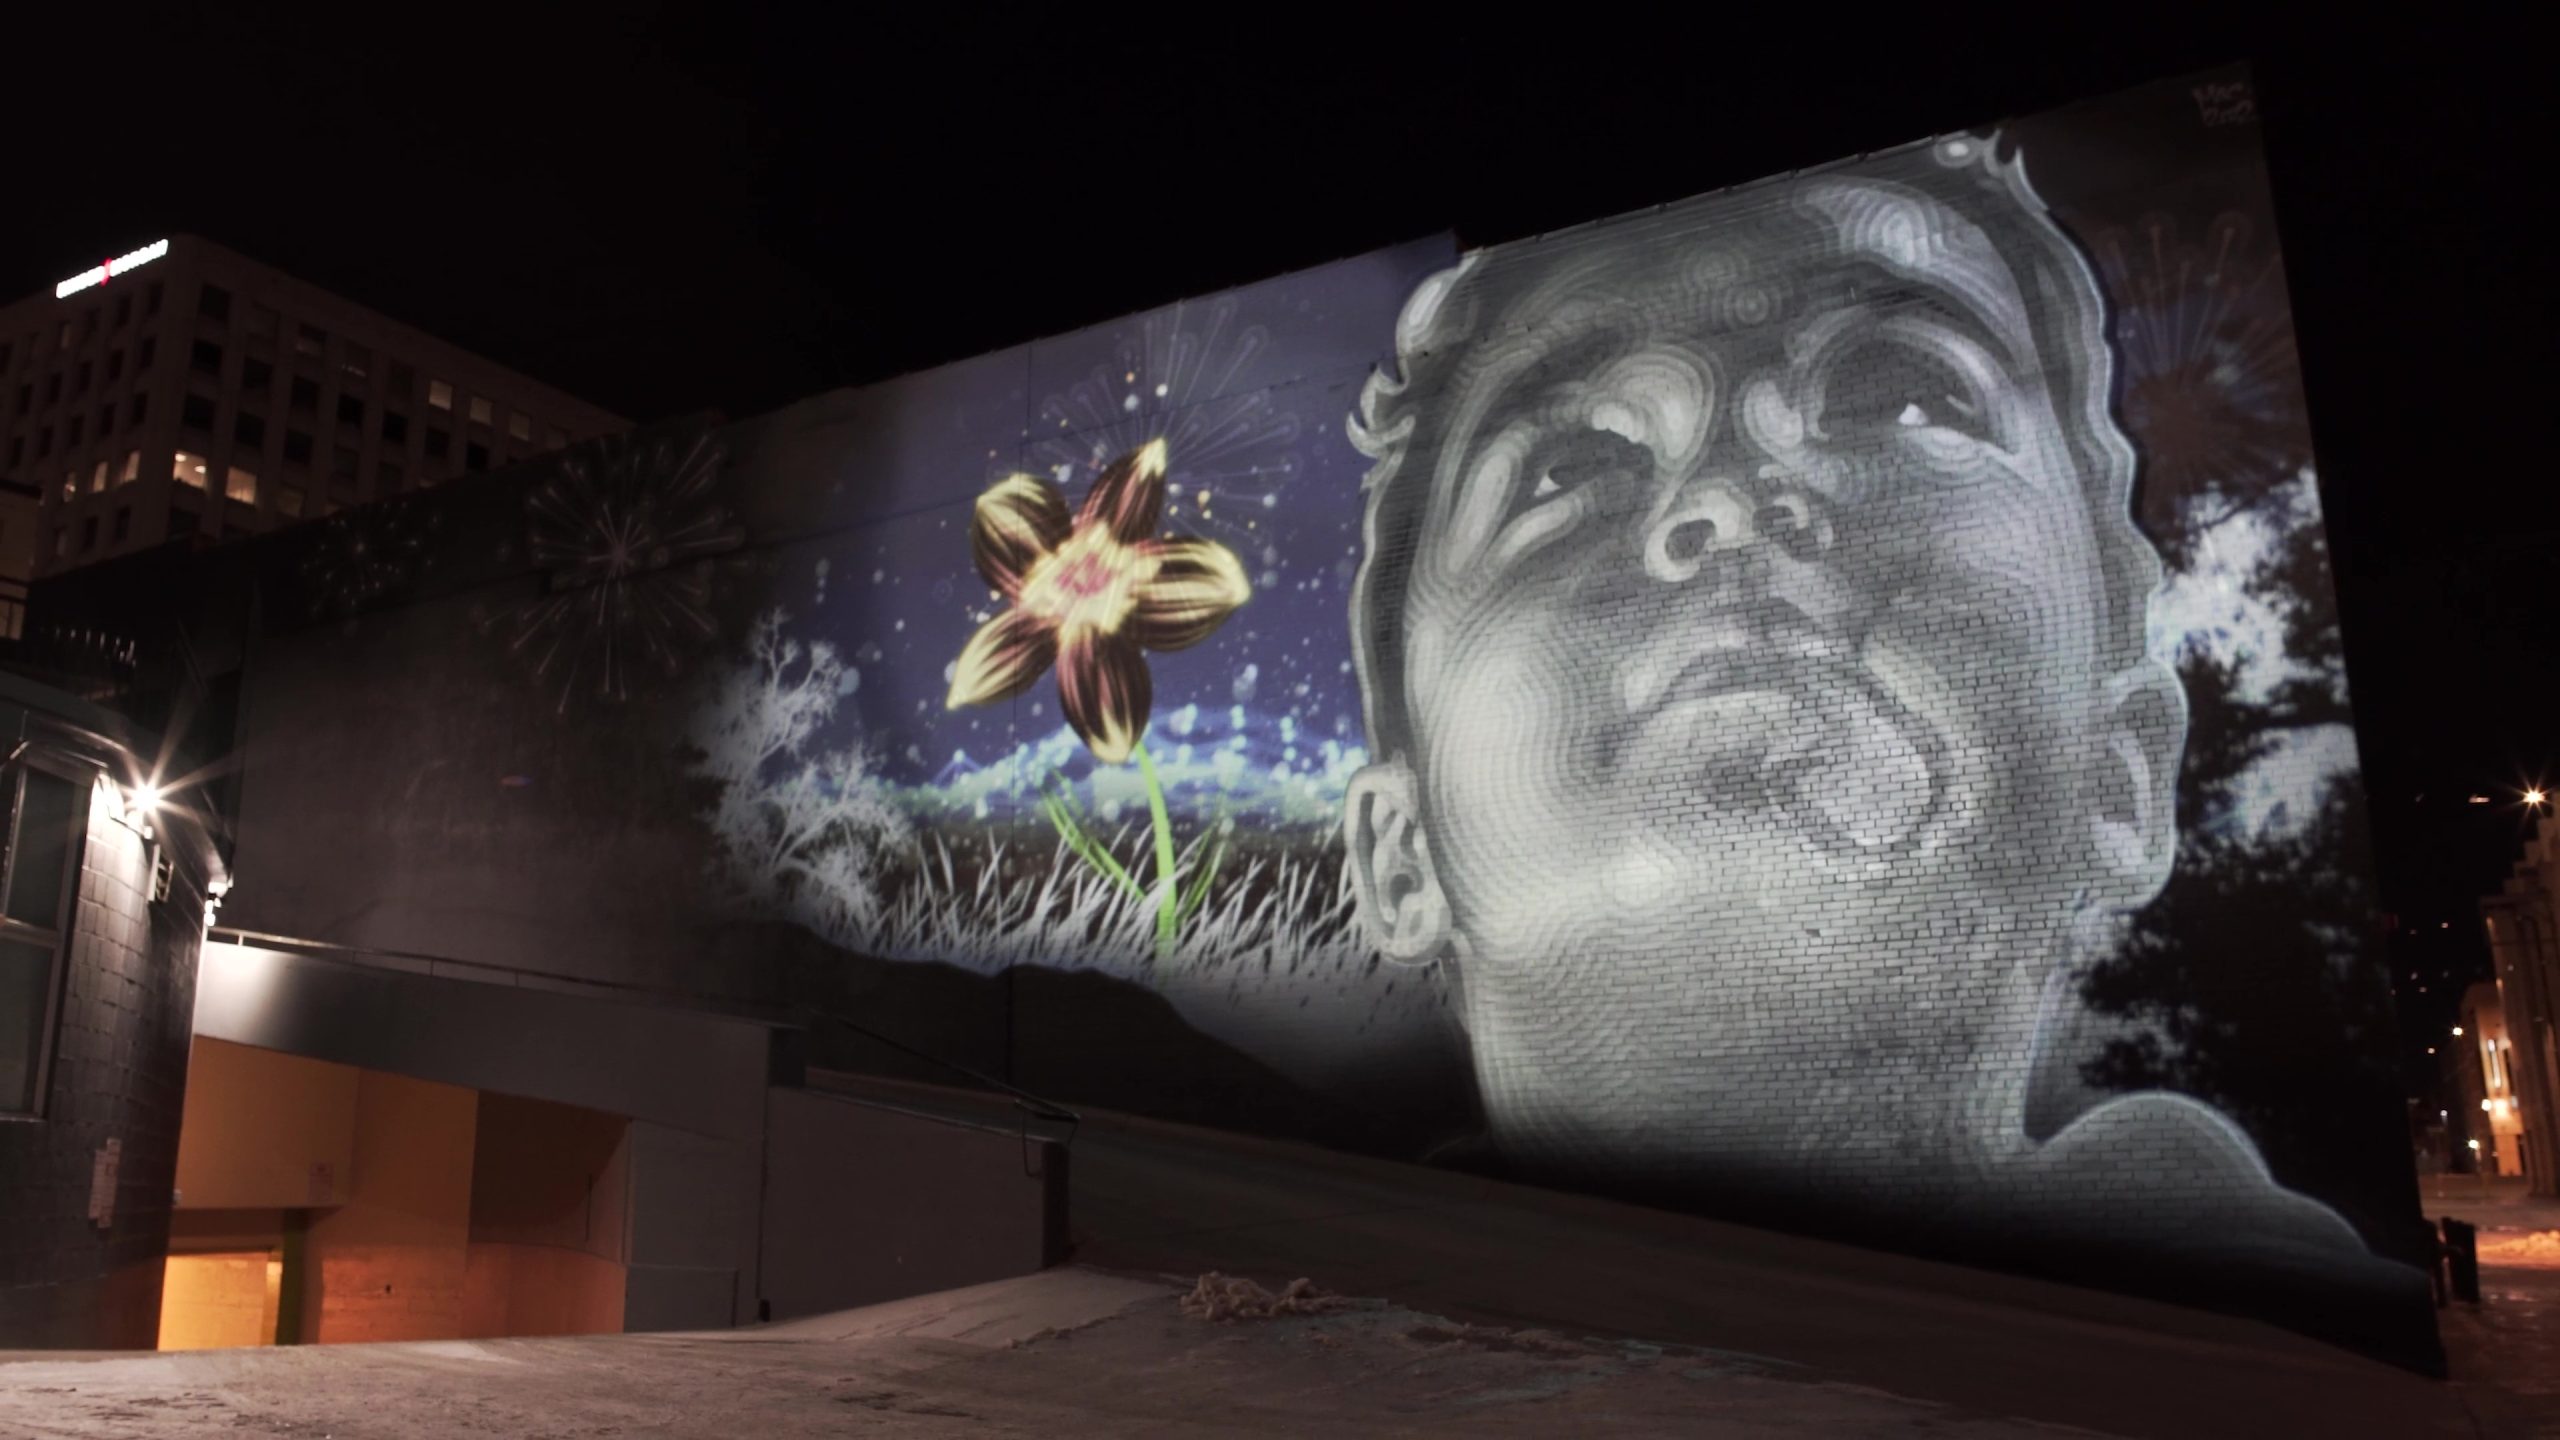 “Mountain Majesty” Projection Mapping Mural in Colorado Springs, USA